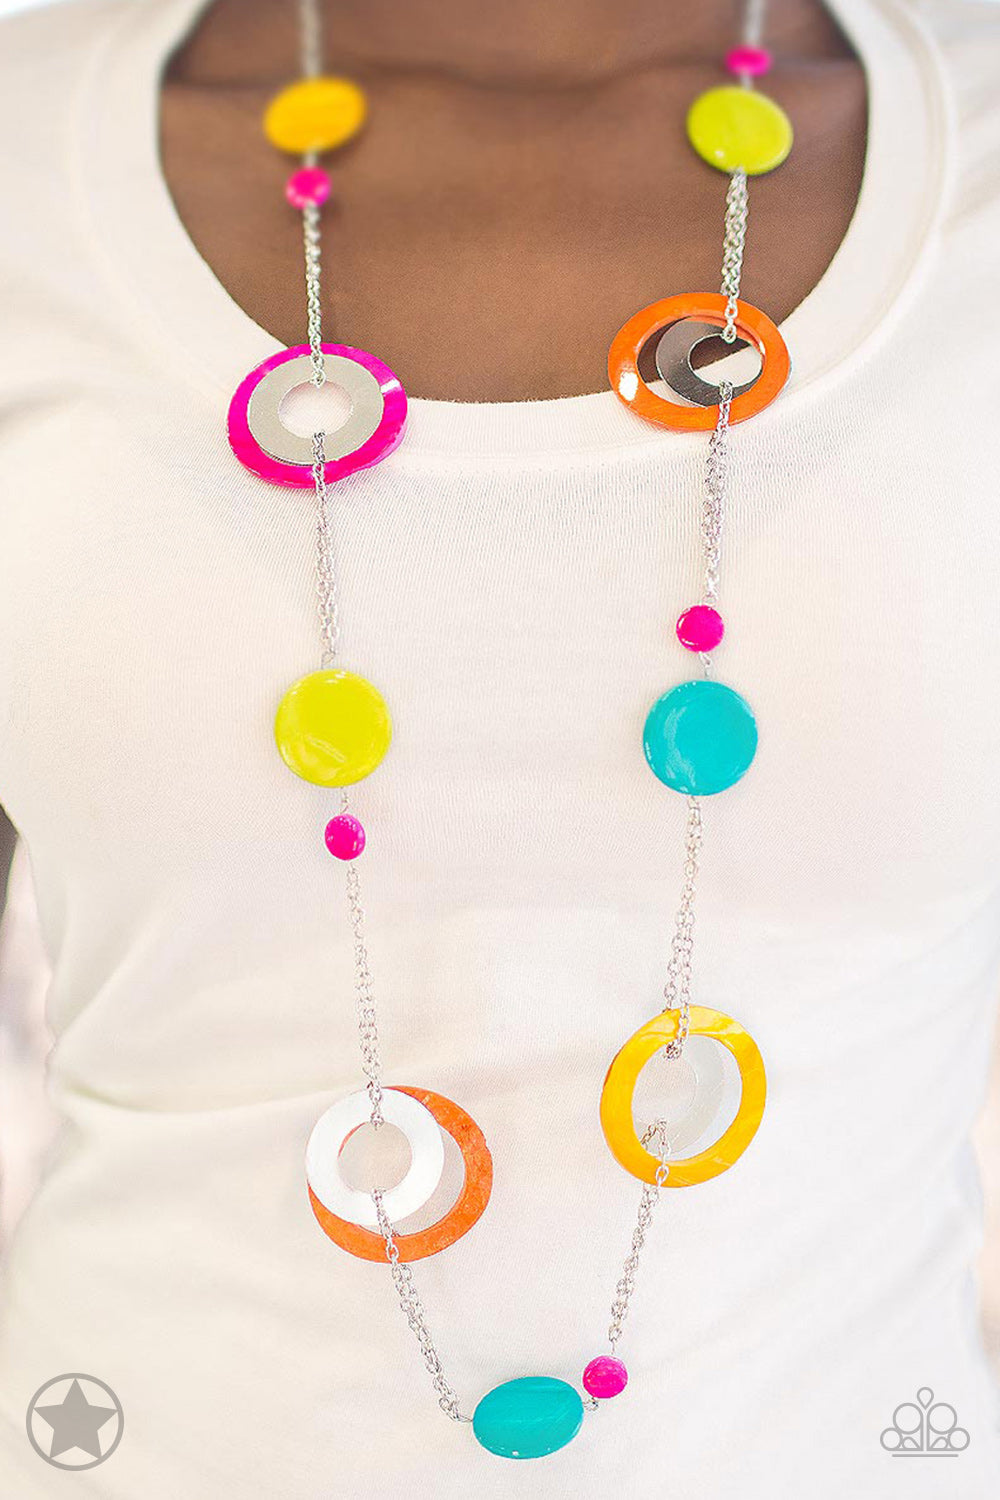 Kaleidoscopically Captivating - Colorful Ring Necklace  - Paparazzi Accessories - All That Sparkles Xoxo 